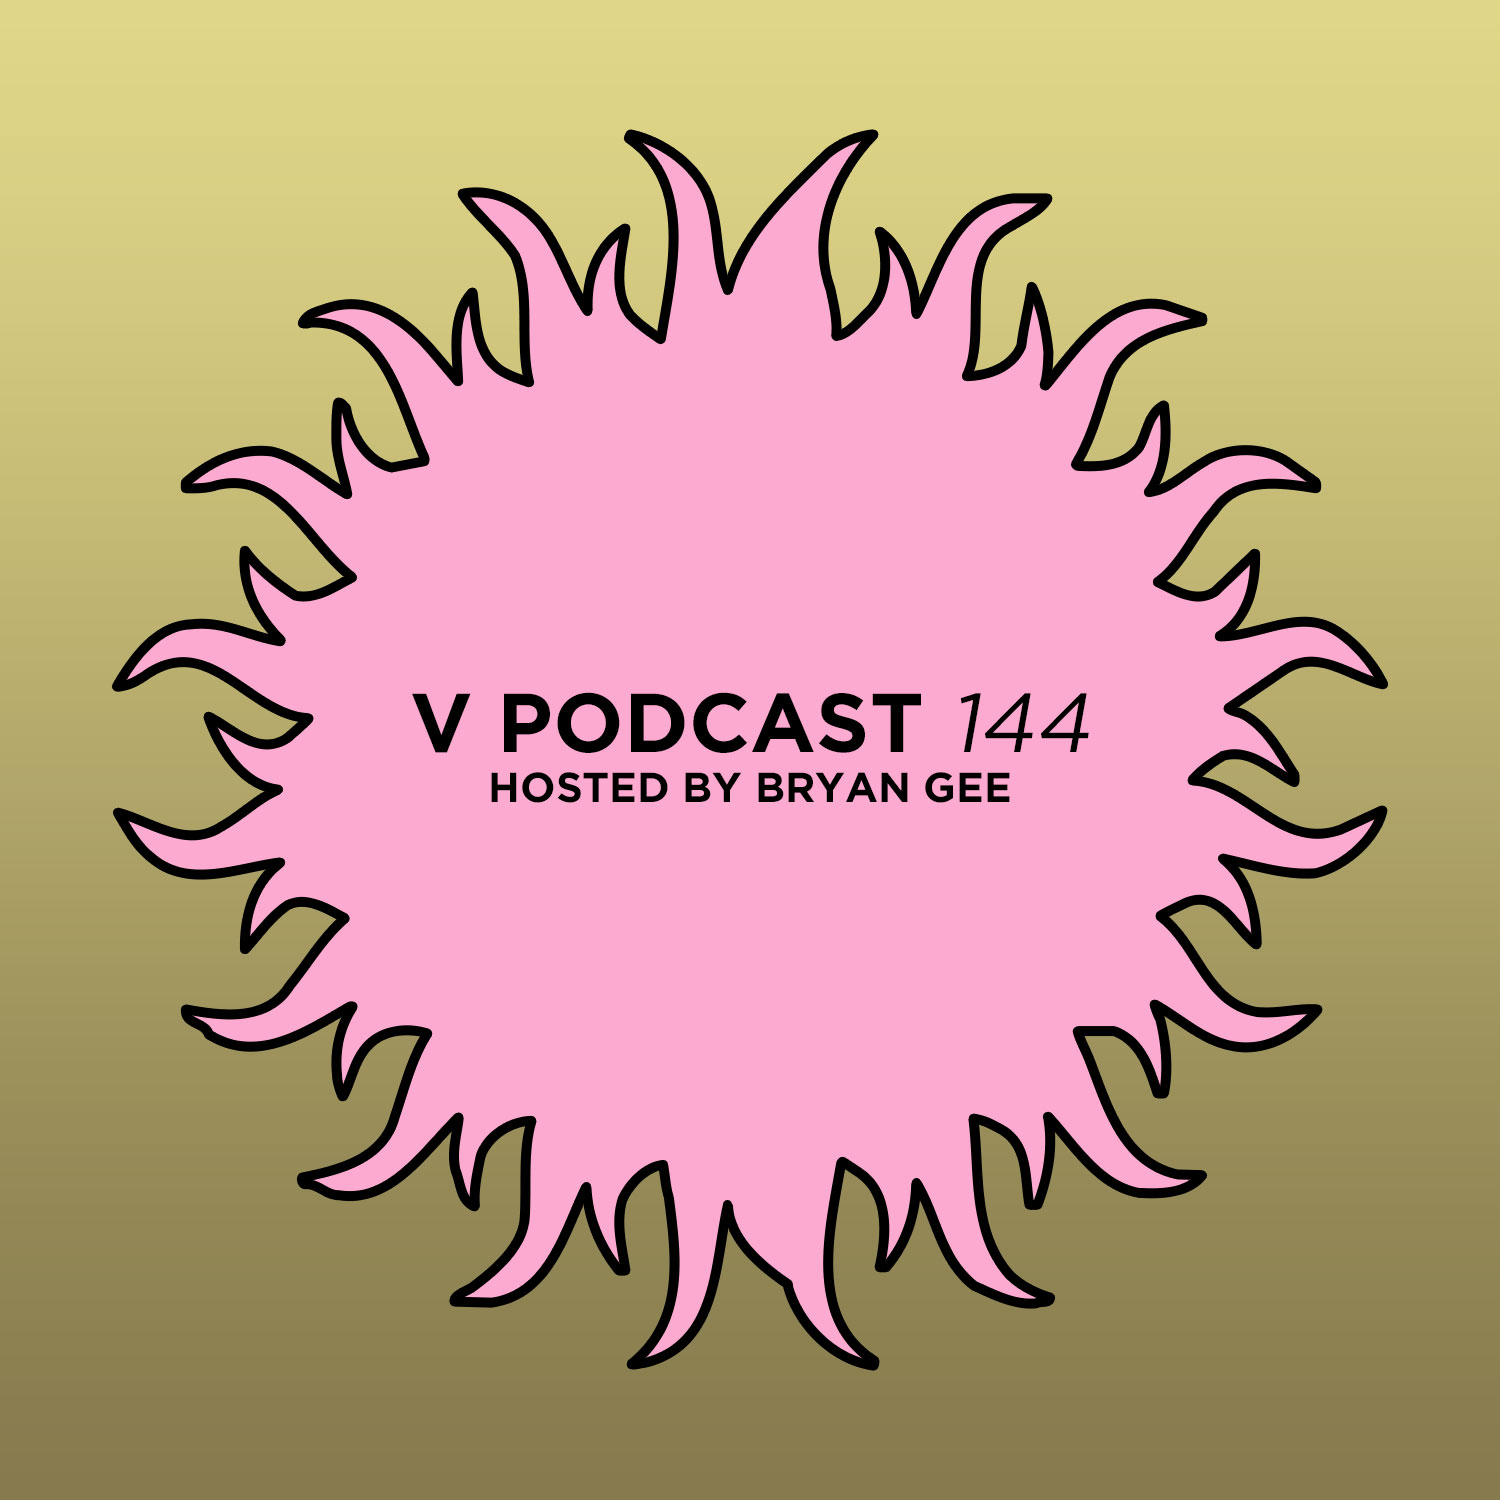 V Podcast 144 - Hosted by Bryan Gee Artwork